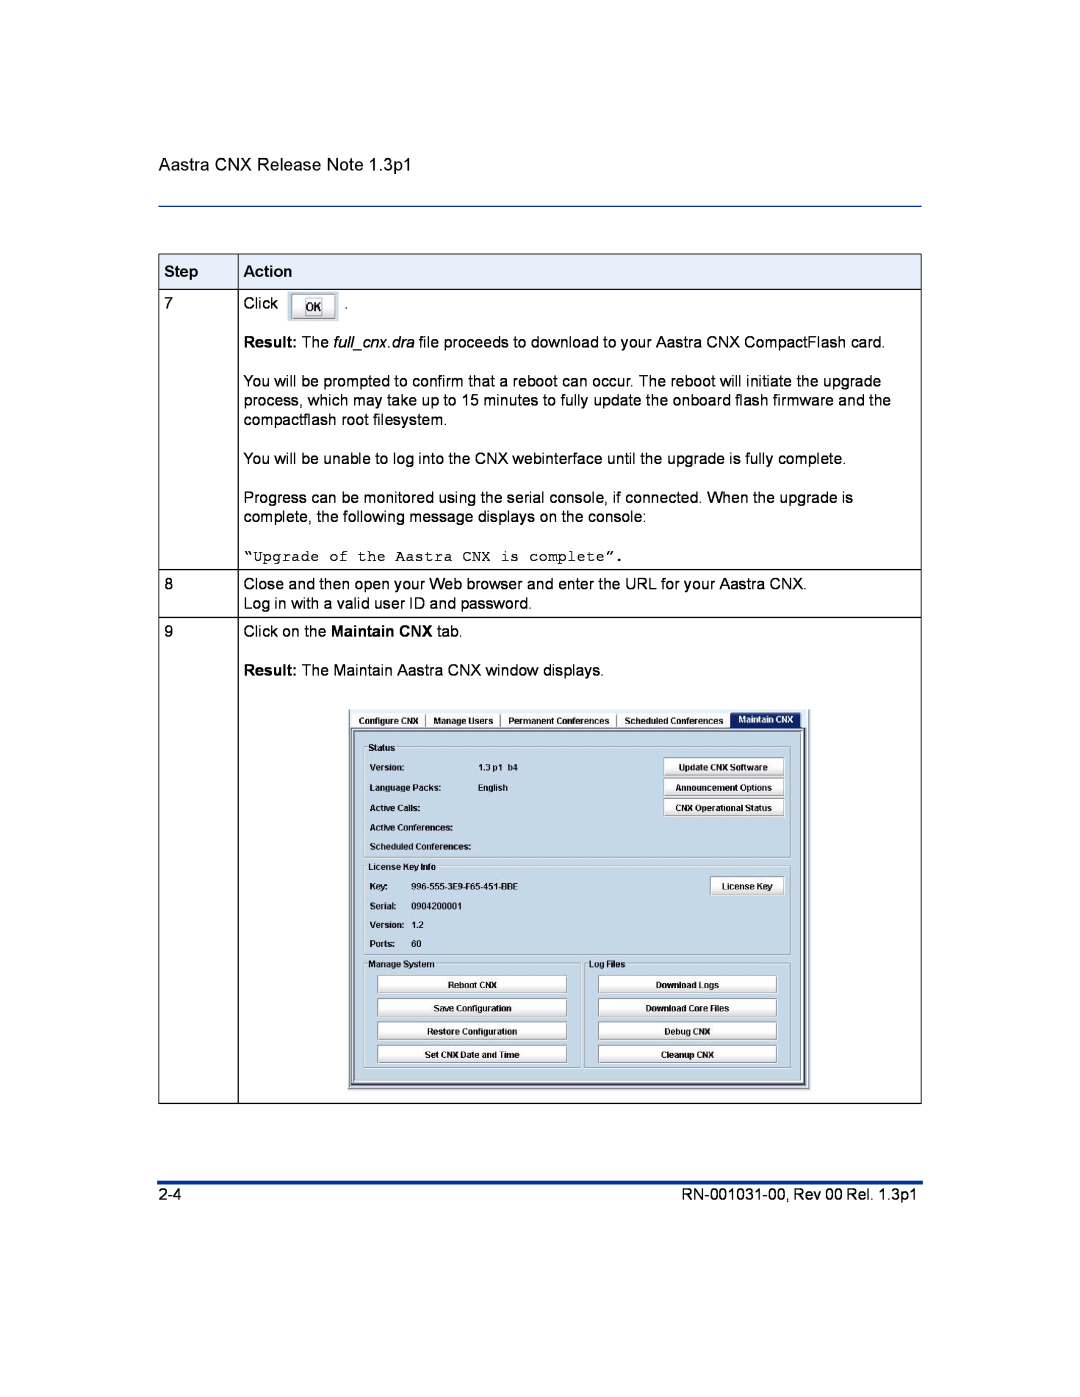 Aastra Telecom RN-001031-00 manual Aastra CNX Release Note 1.3p1, Step, Action, Click 